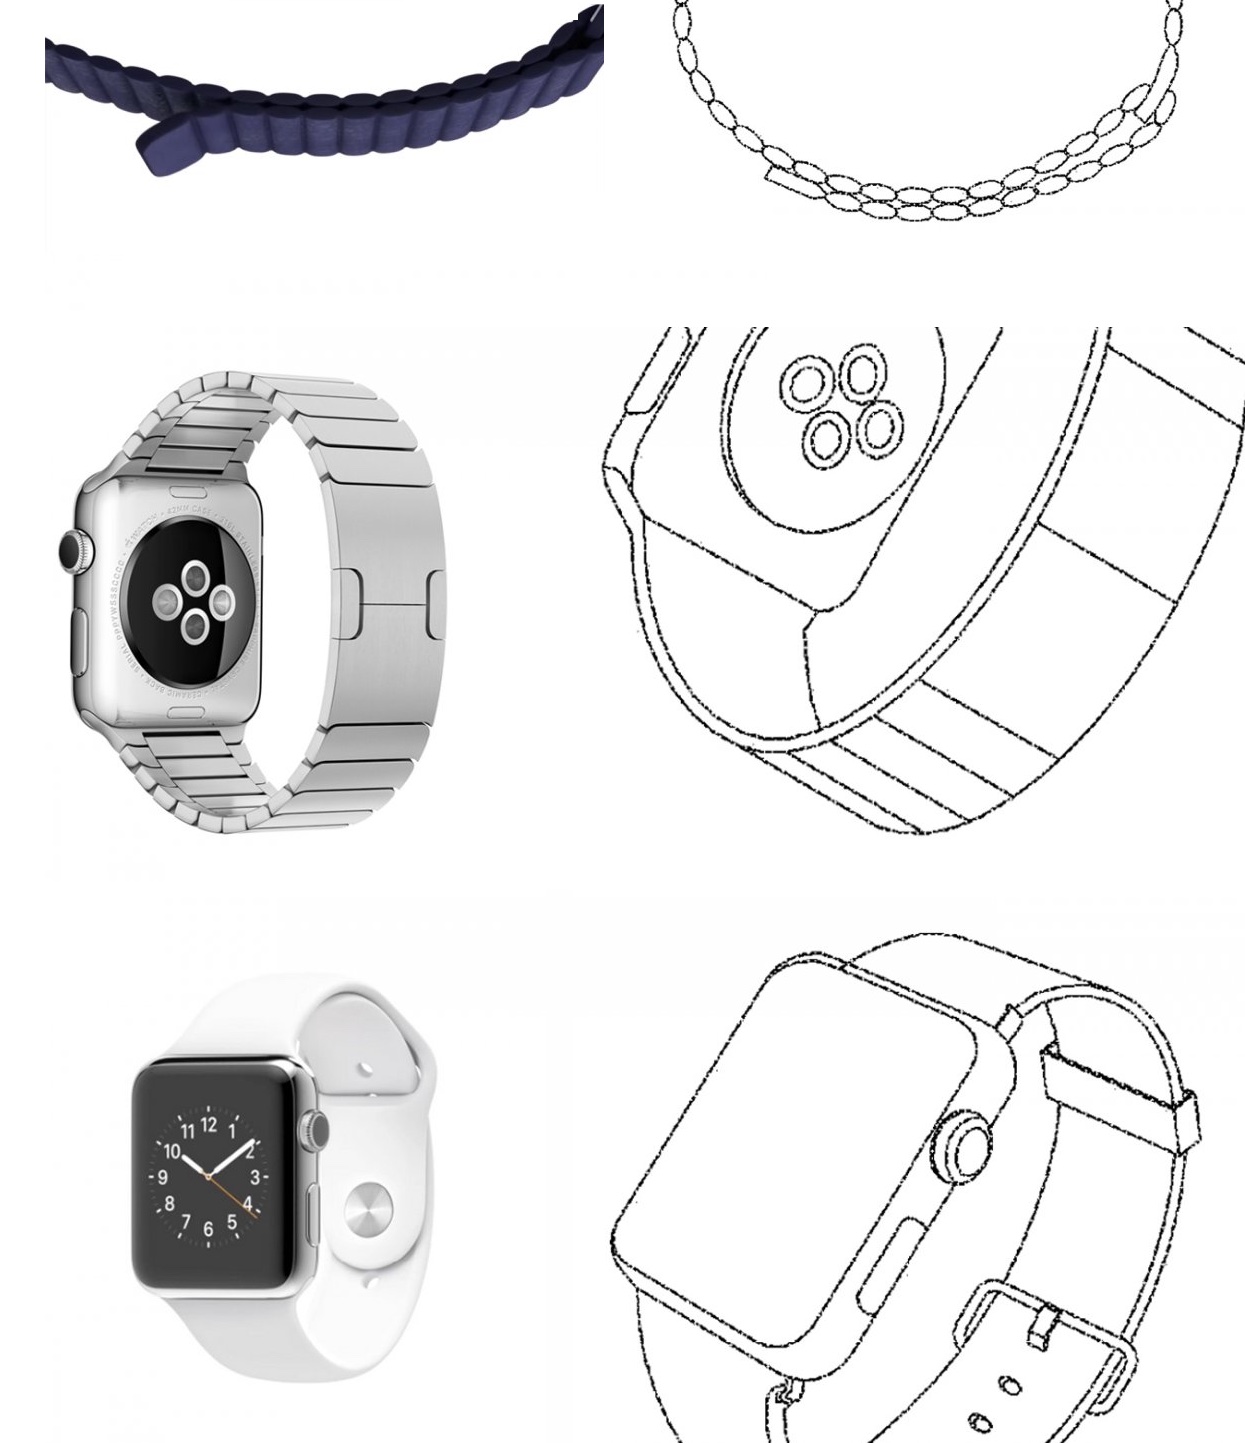 Samsung-Wearable-Device-patent-filing-Apple-Watch-005